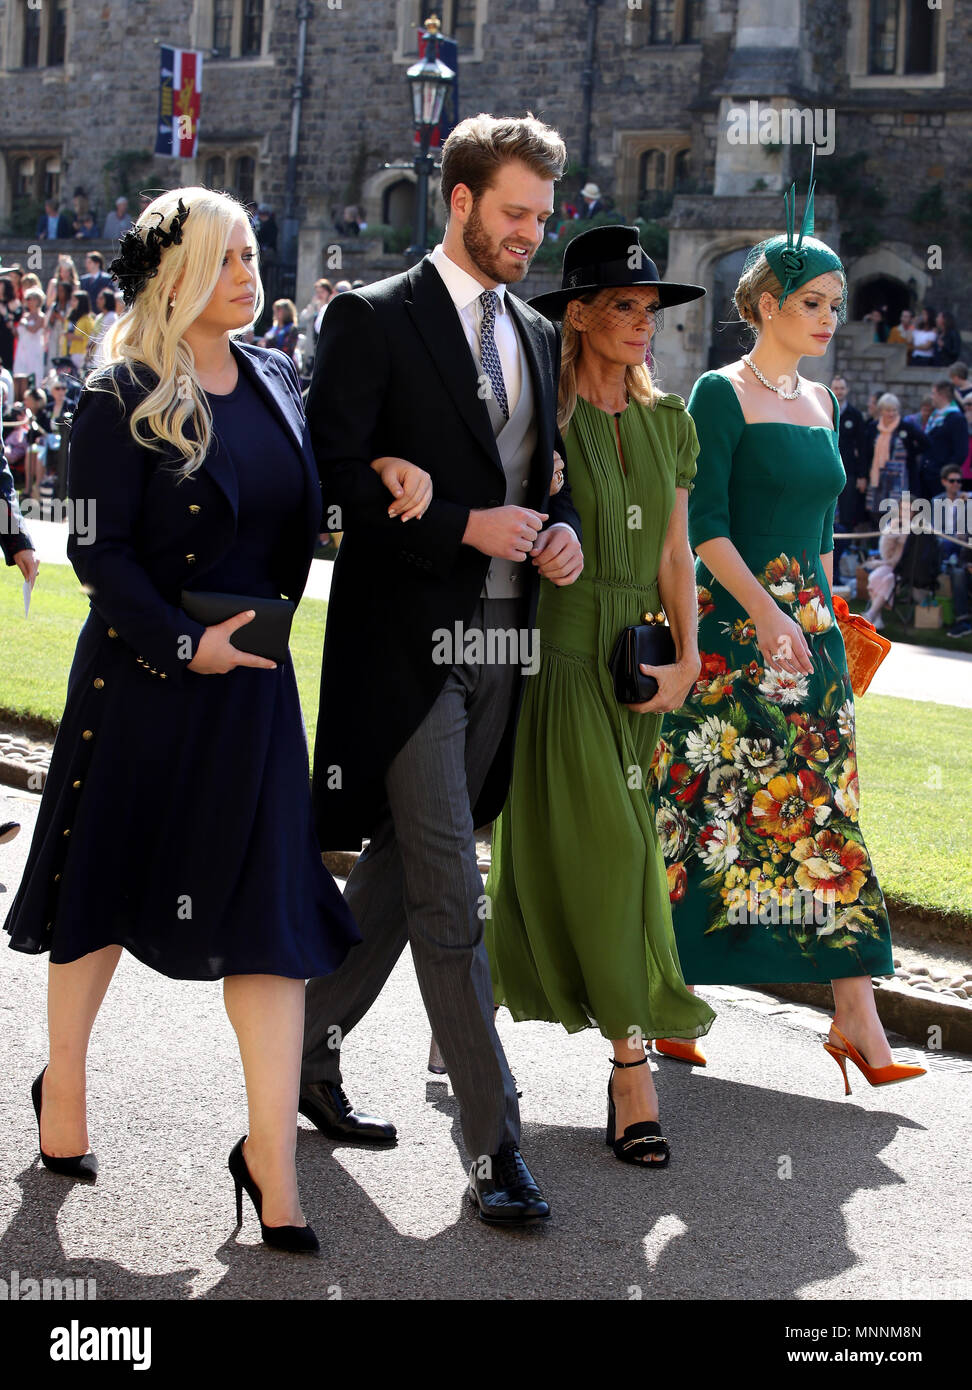 Eliza Spencer, Louis Spencer, Victoria Aitken and Kitty Spencer arrive at St George's Chapel at Windsor Castle for the wedding of Meghan Markle and Prince Harry. Stock Photo